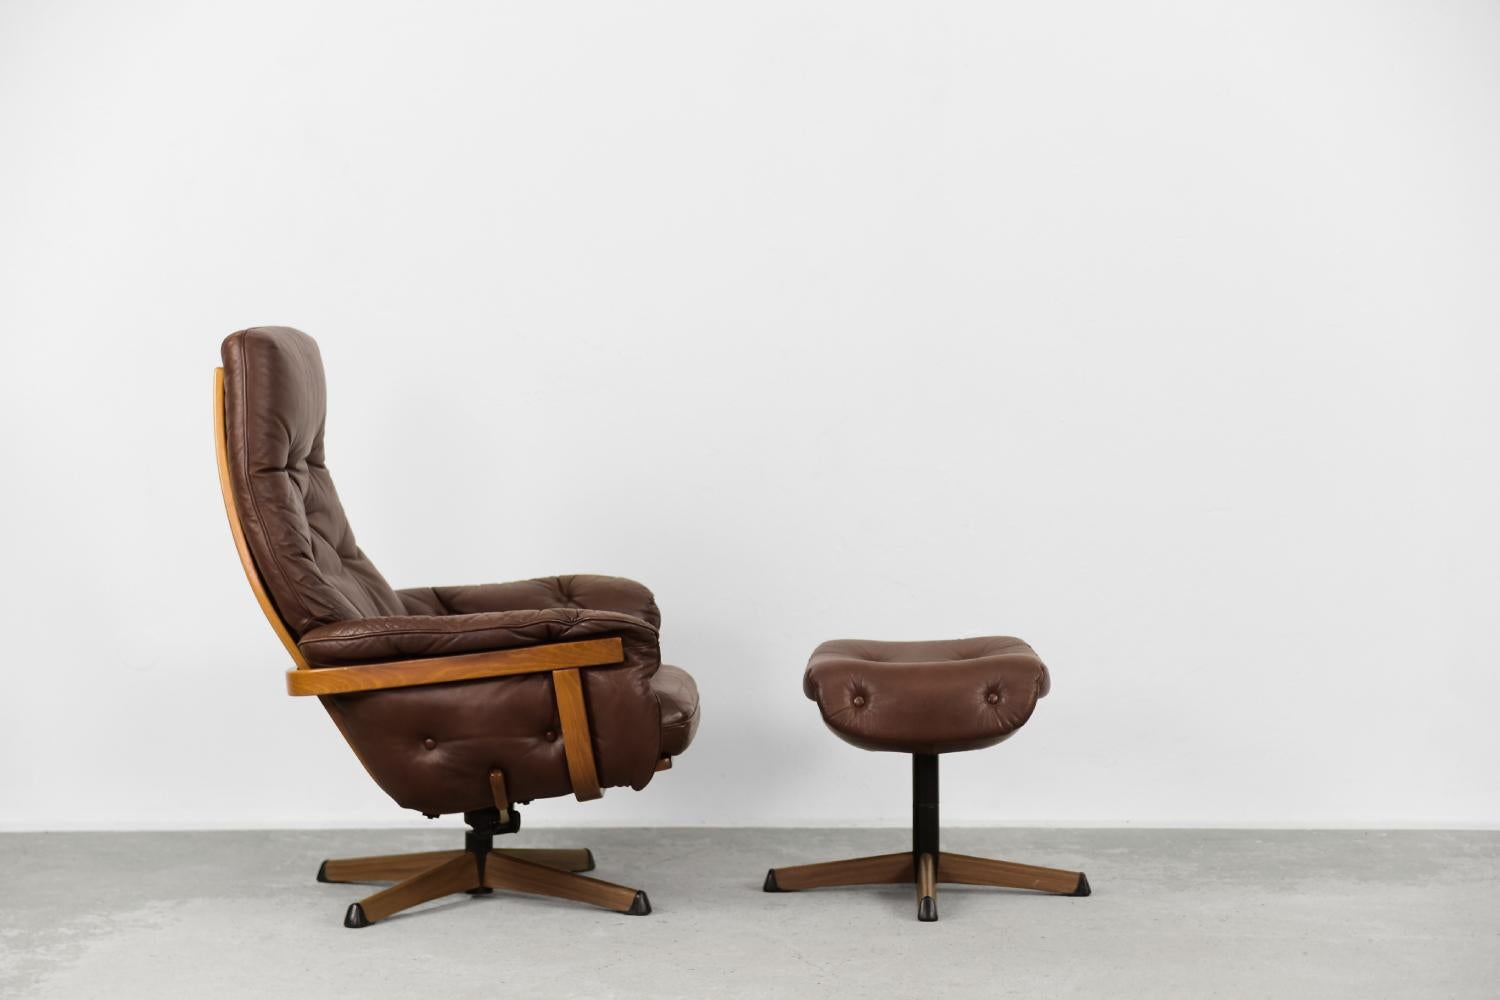 This modernist leather armchair and ottoman was produced by the Swedish Göte Möbler manufacture during the 1960s. The frame is made of solid wood and upholstered with brown natural leather with elegant quilting. The metal legs were covered with a